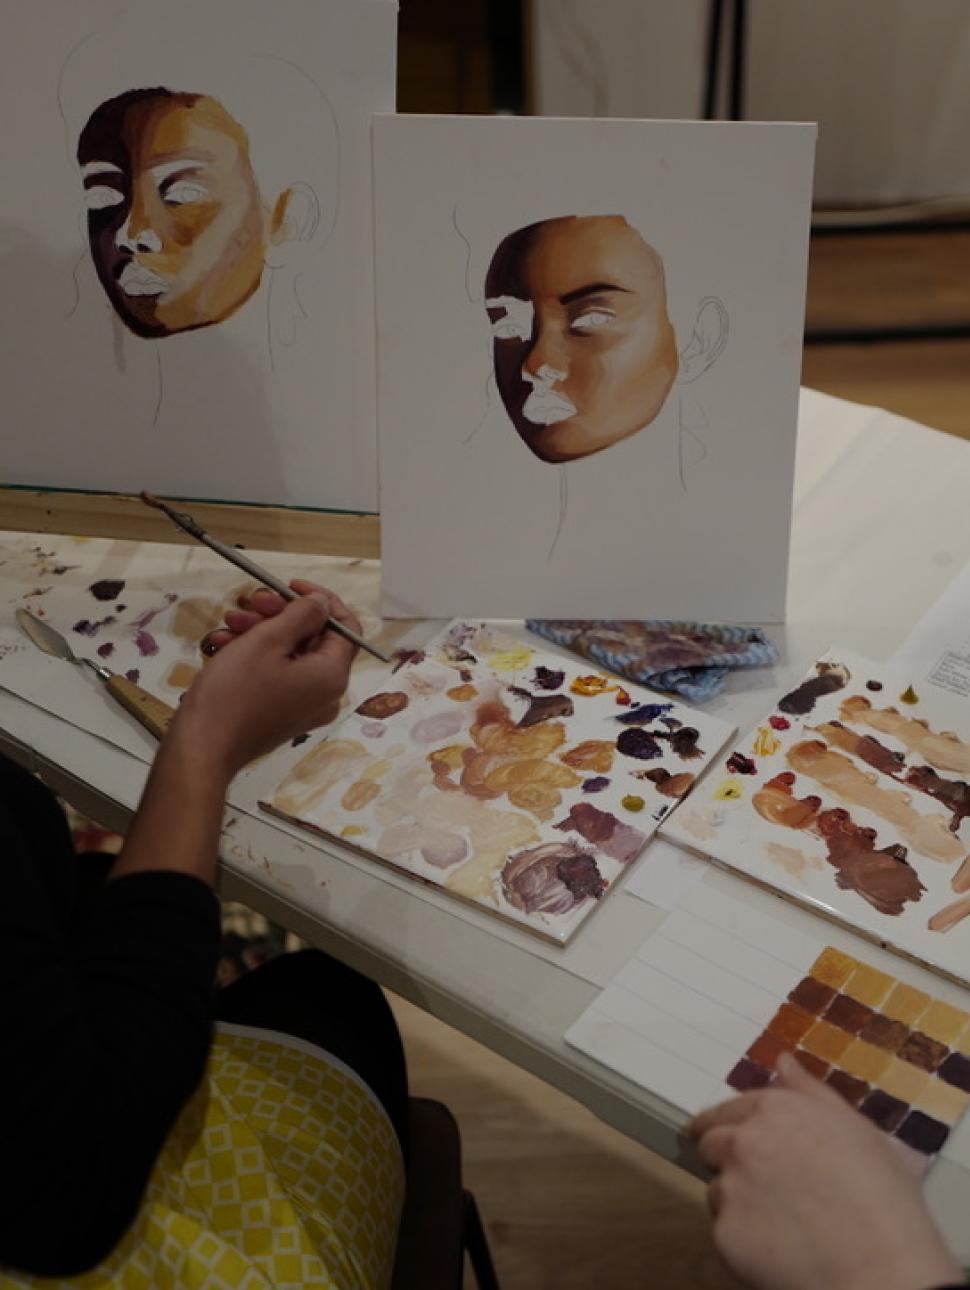 This image shows someone painting a portrait of someone.